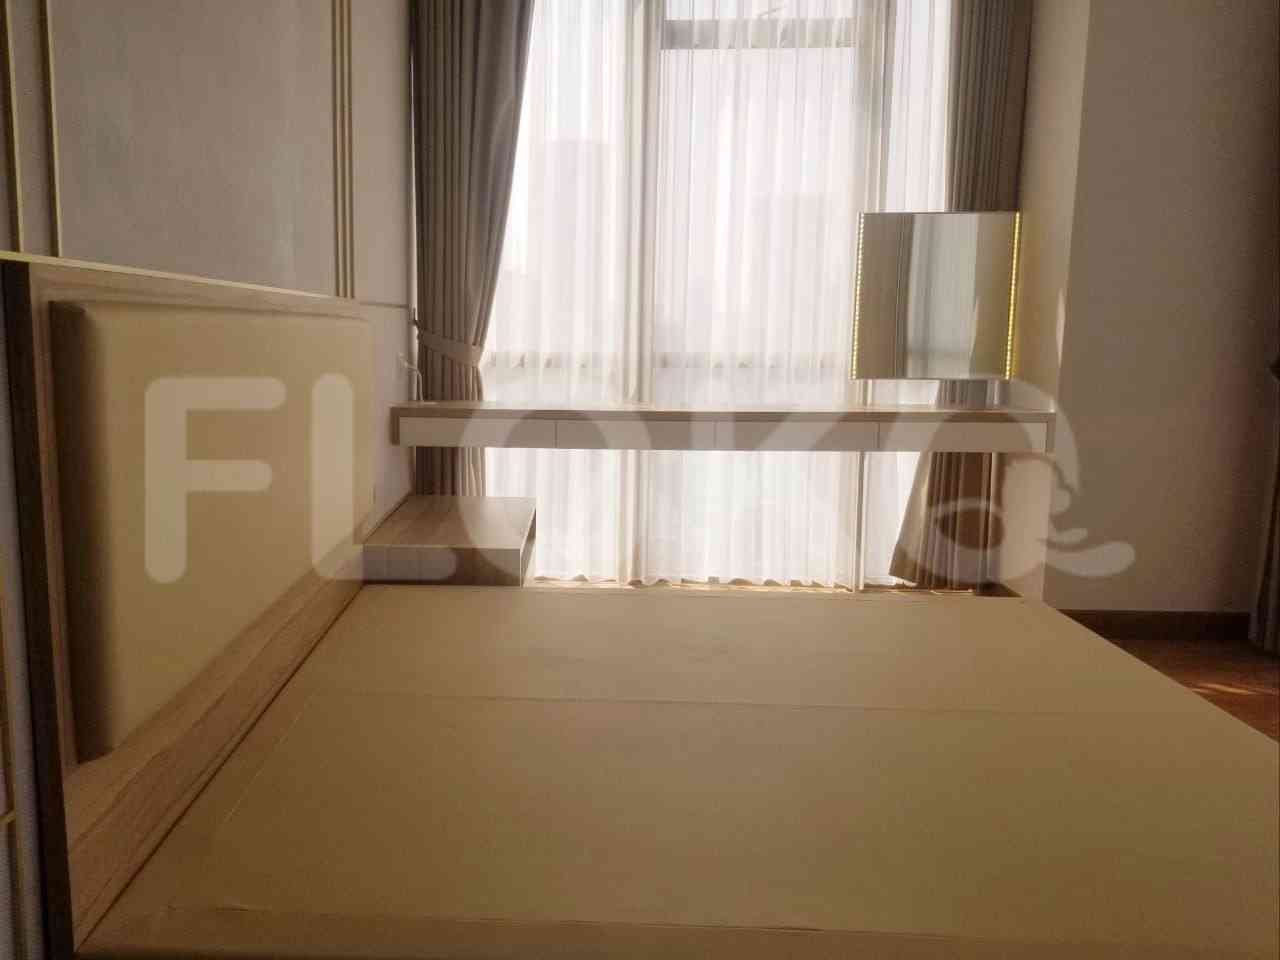 2 Bedroom on 35th Floor for Rent in Sudirman Hill Residences - ftaf98 2